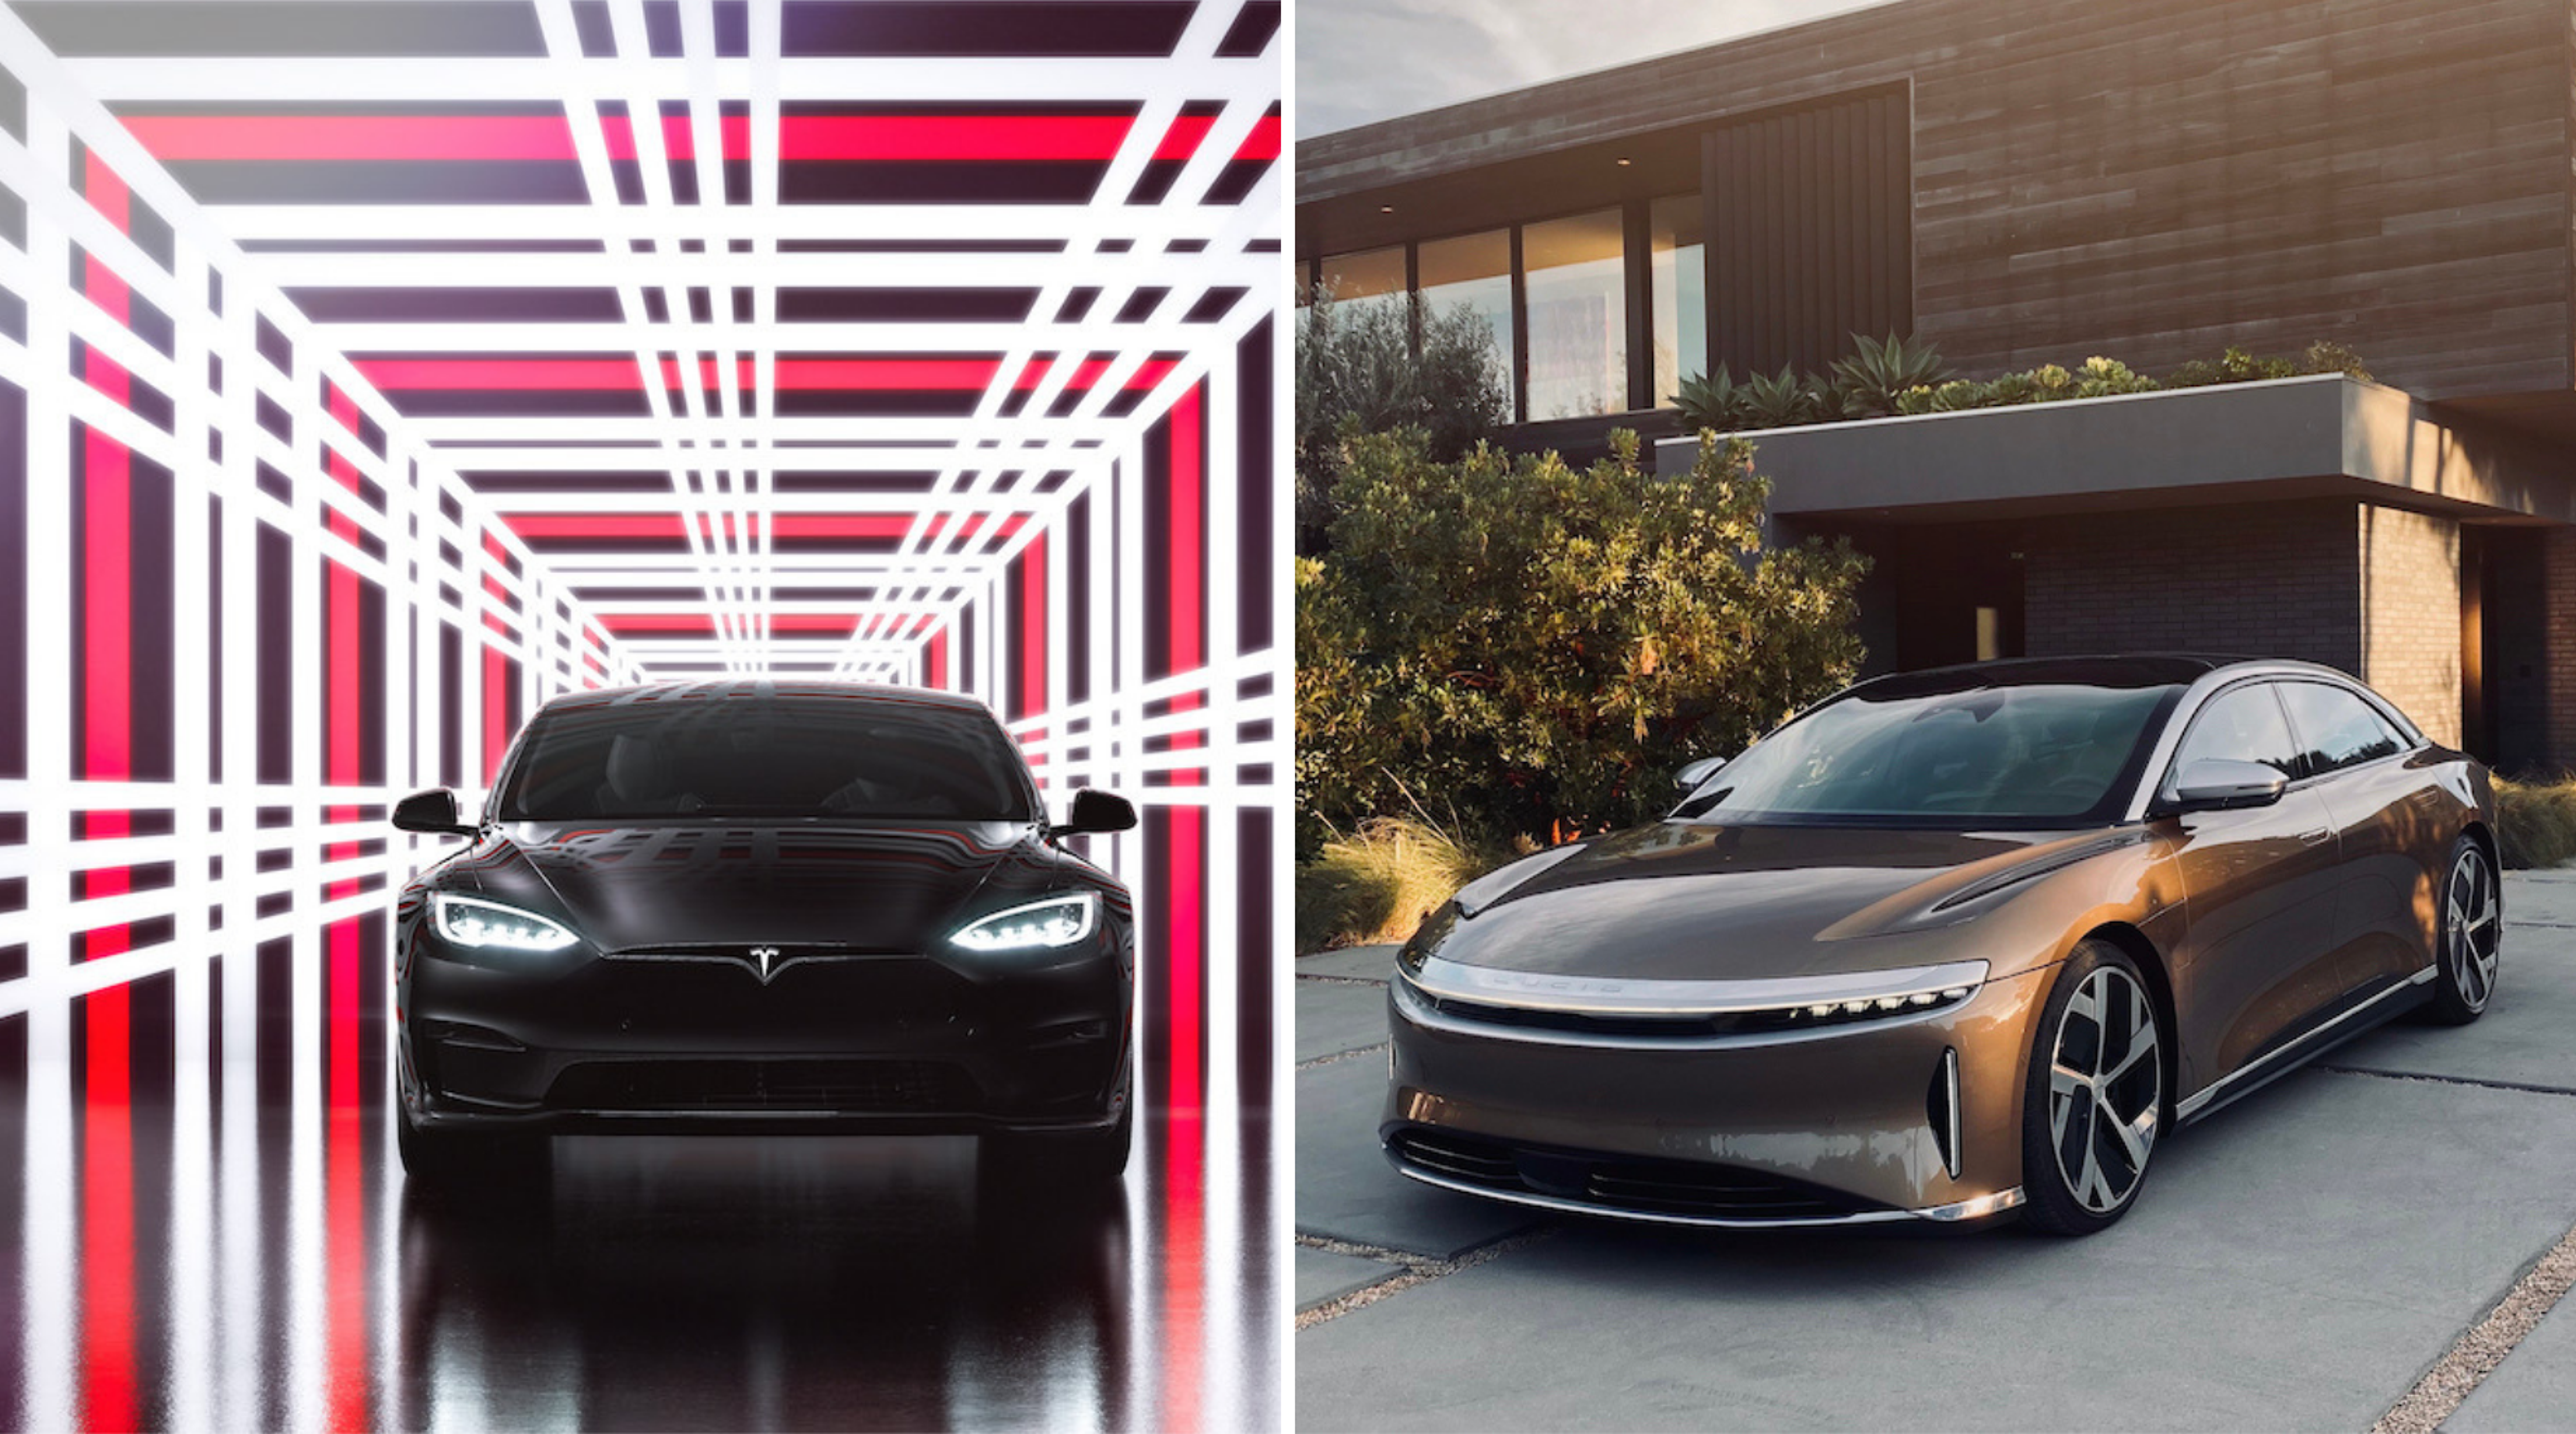 So Does Elon Musk&#39;s Tesla Or Lucid Make The Cooler-Looking Electric Vehicle?